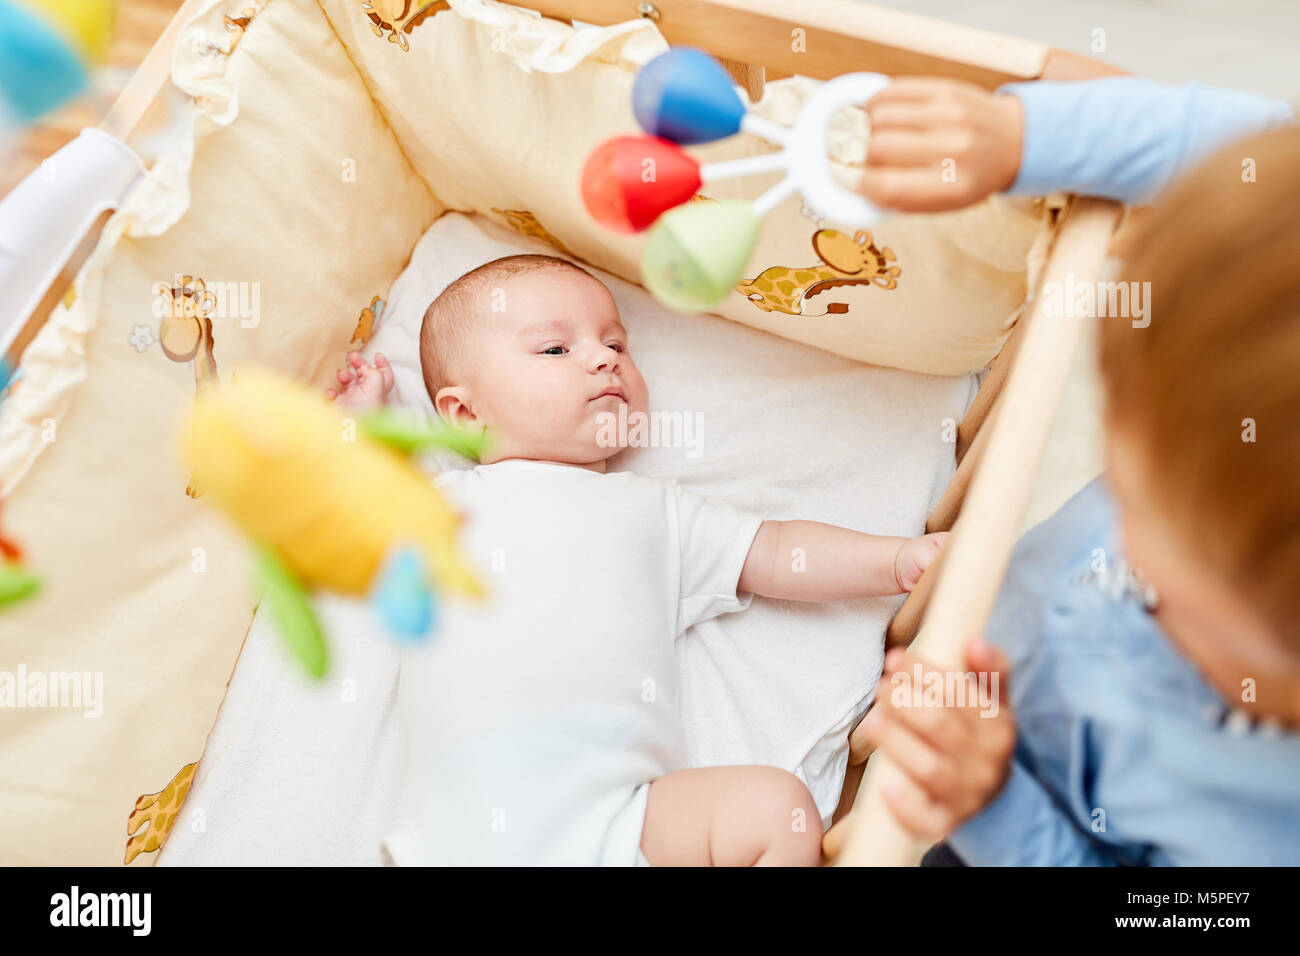 Boy looks at newborn baby while falling asleep in cot Stock Photo